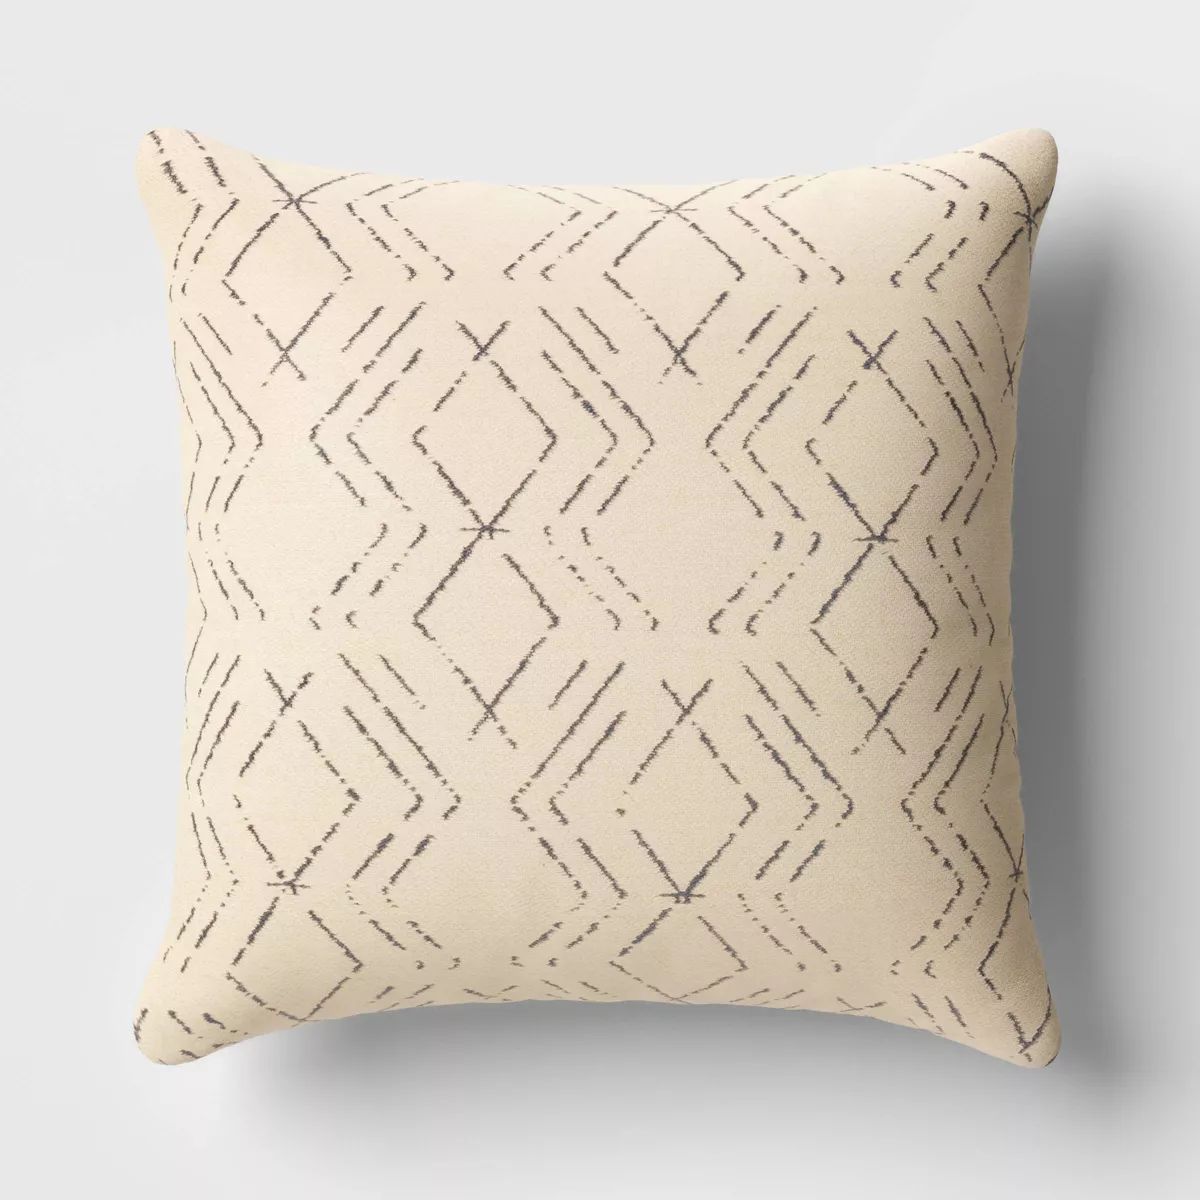 20"x20" Diamond Lines Square Outdoor Throw Pillow Gray/Beige - Threshold™ | Target